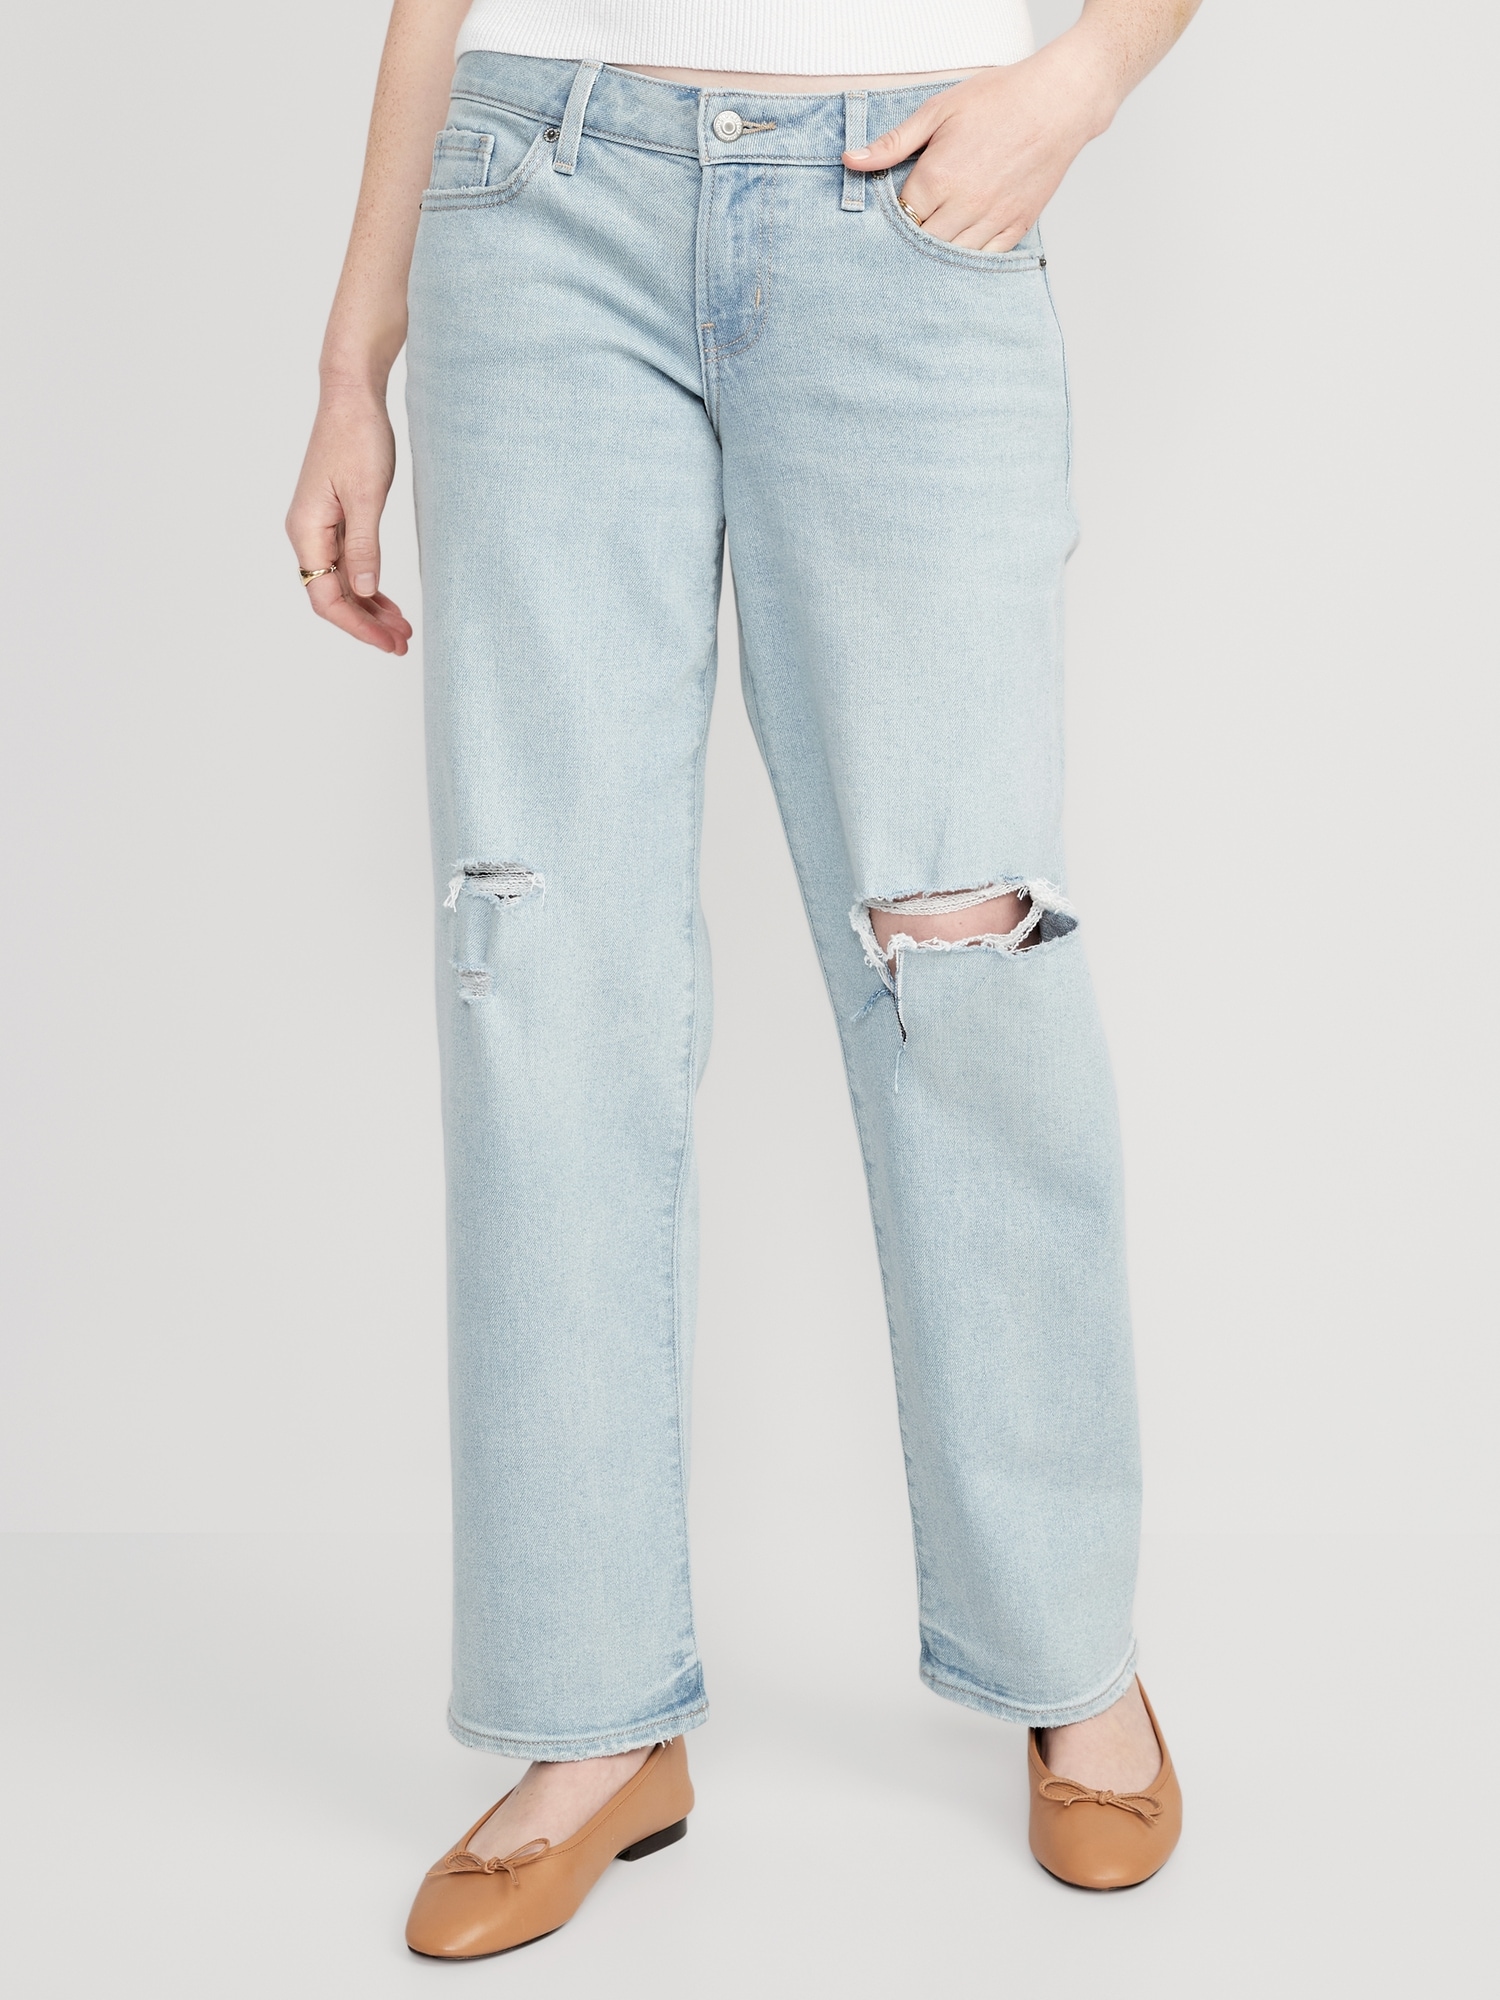 Old Navy Low-Rise OG Loose Ripped Jeans for Women blue. 1